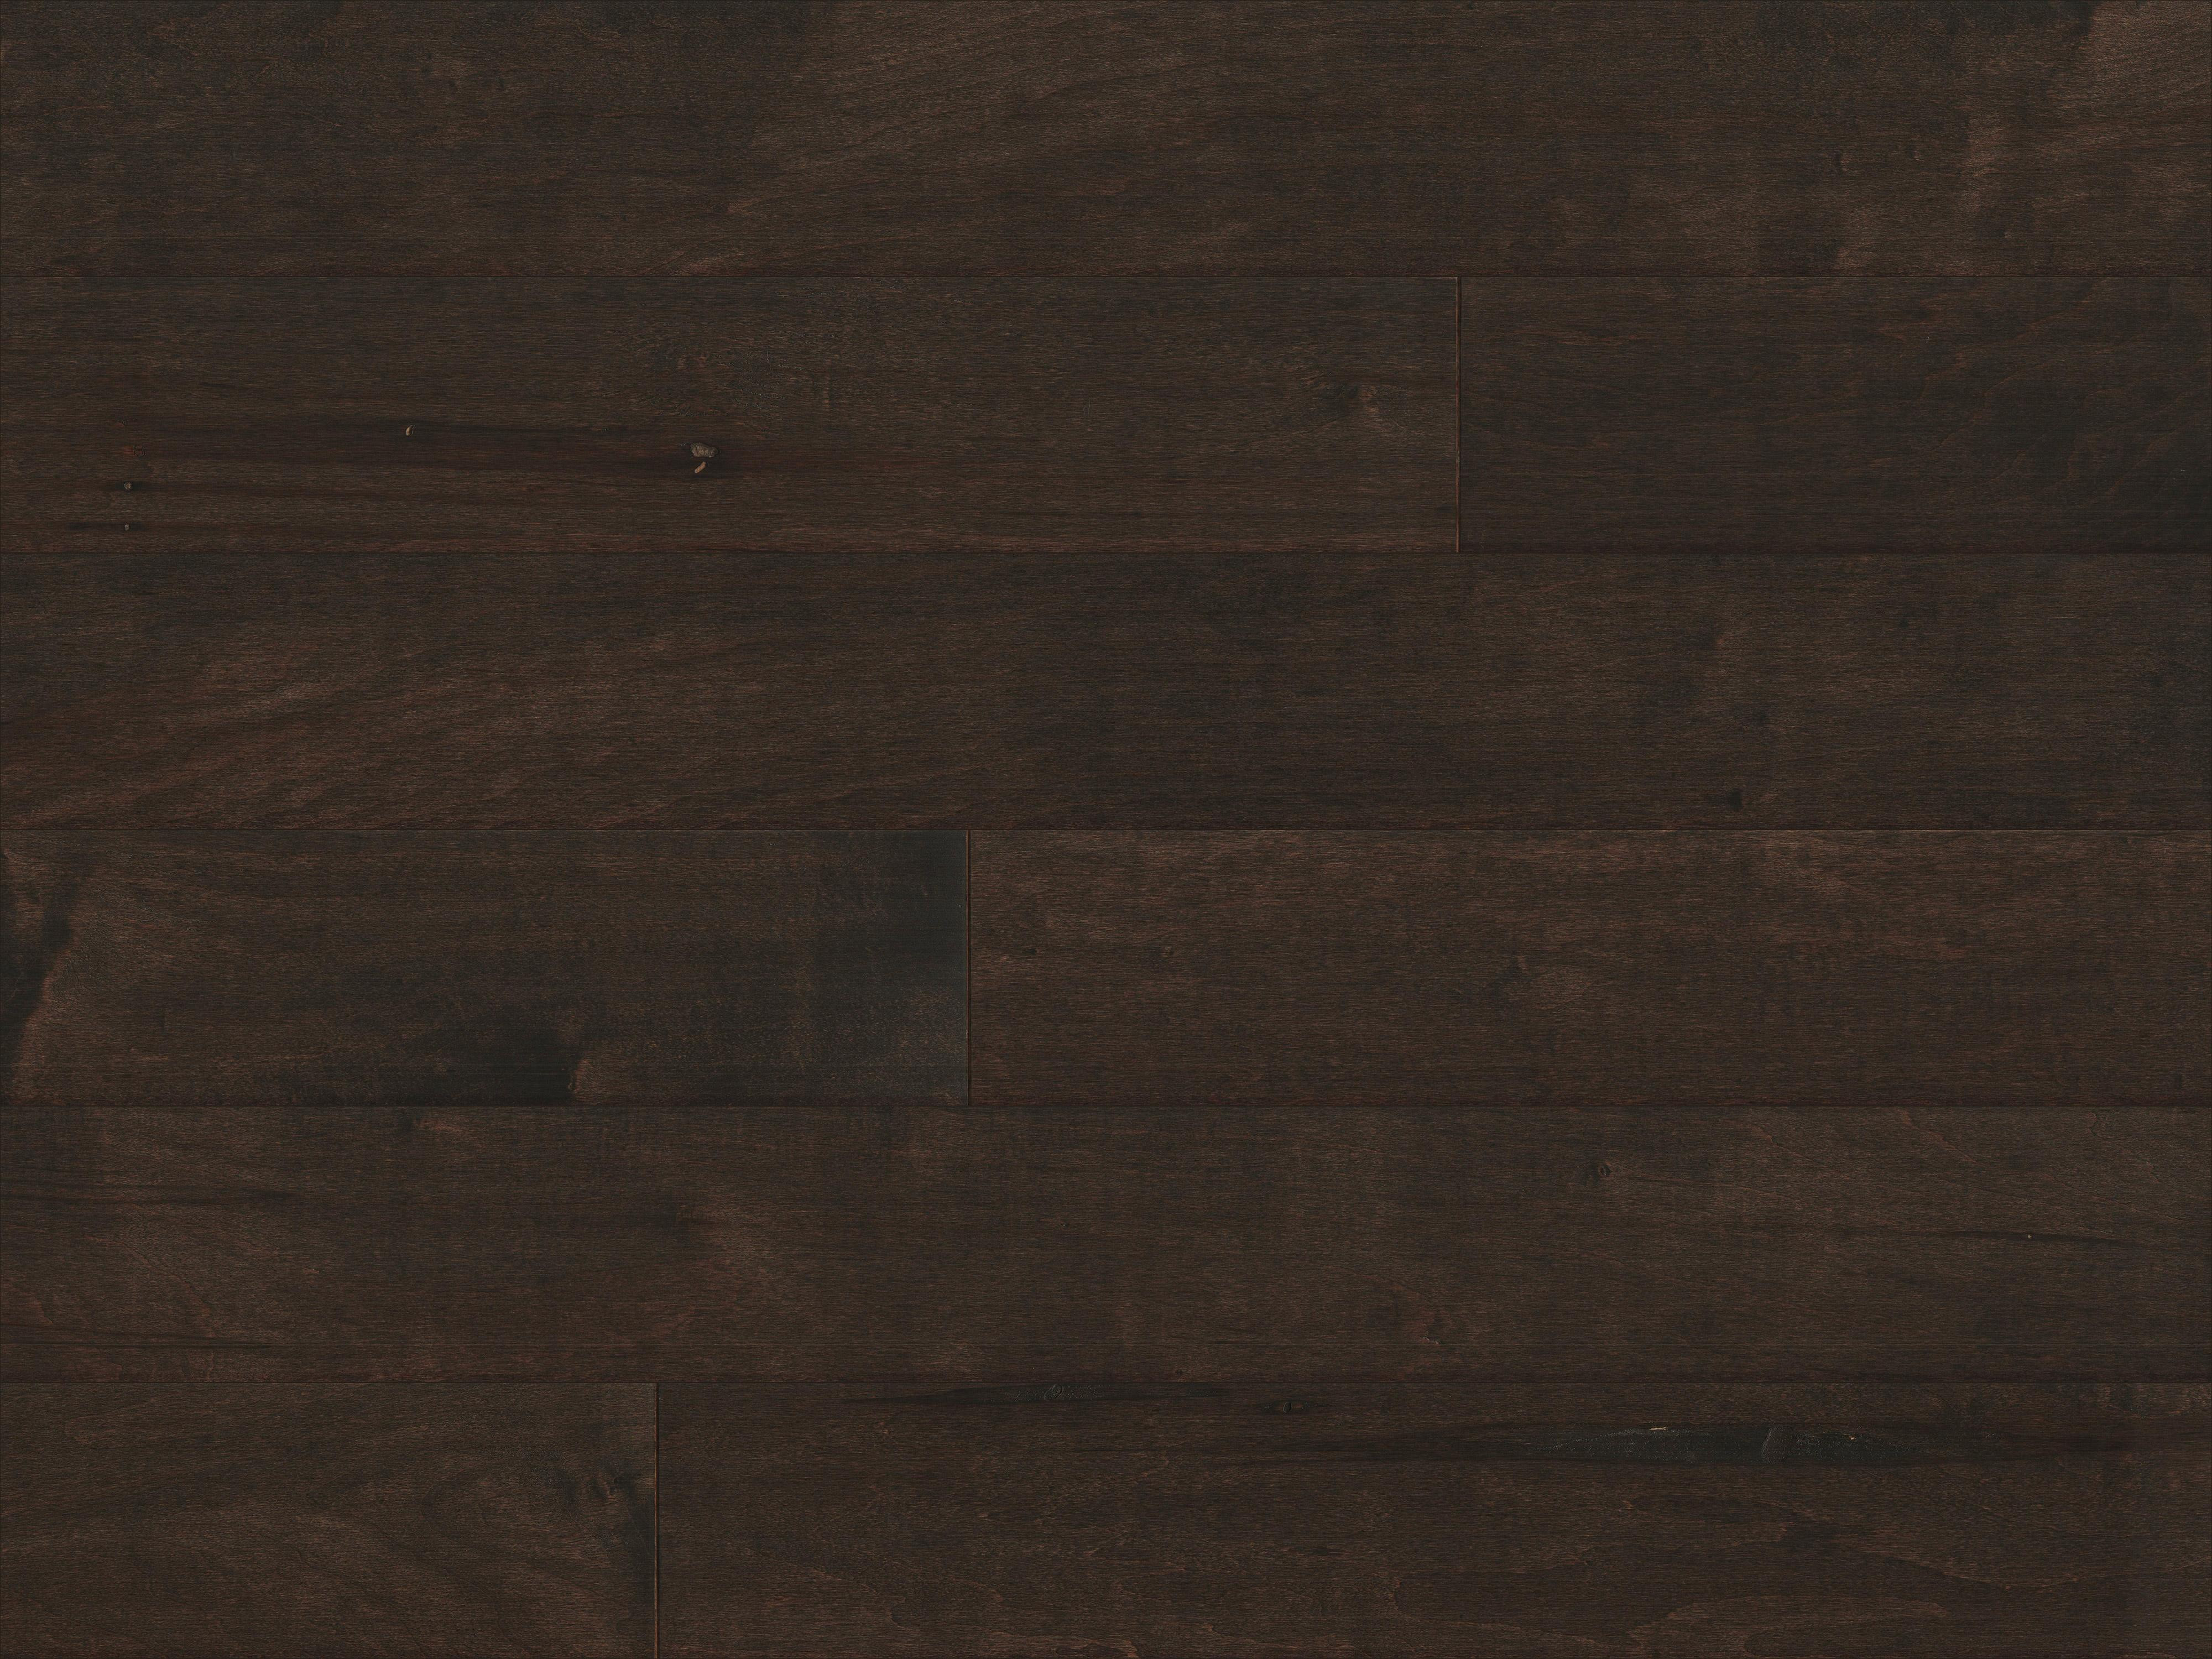 21 Wonderful 1 1 2 Inch Maple Hardwood Flooring 2024 free download 1 1 2 inch maple hardwood flooring of mullican ridgecrest maple cappuccino 1 2 thick 5 wide engineered throughout mullican ridgecrest maple cappuccino 1 2 thick 5 wide engineered hardwood fl